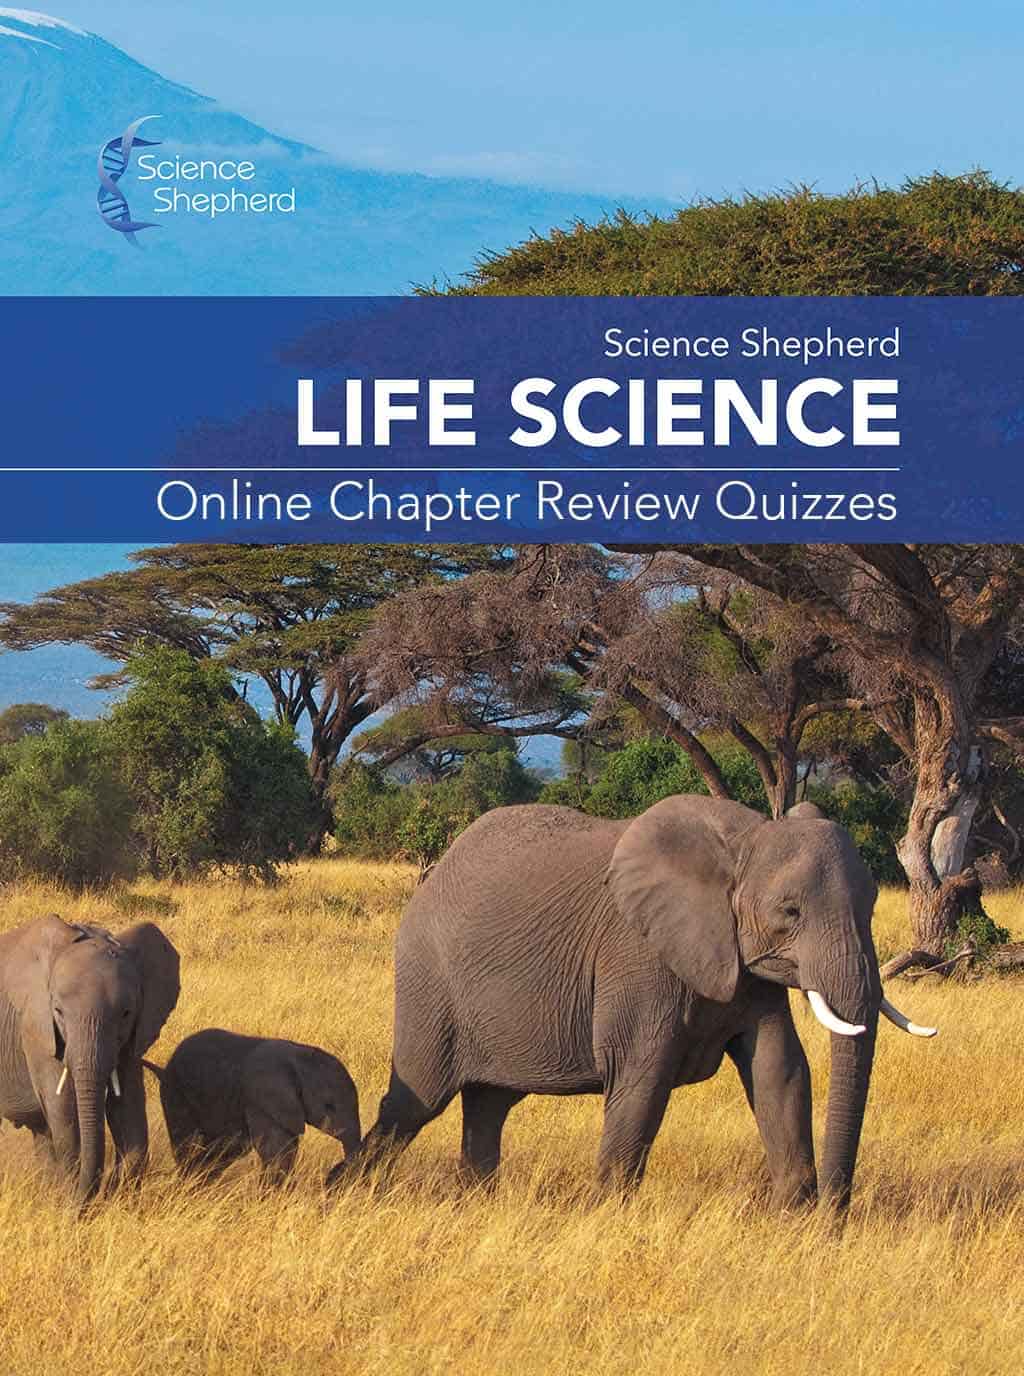 Homeschool science curriculum review online quizzes cover of elephants